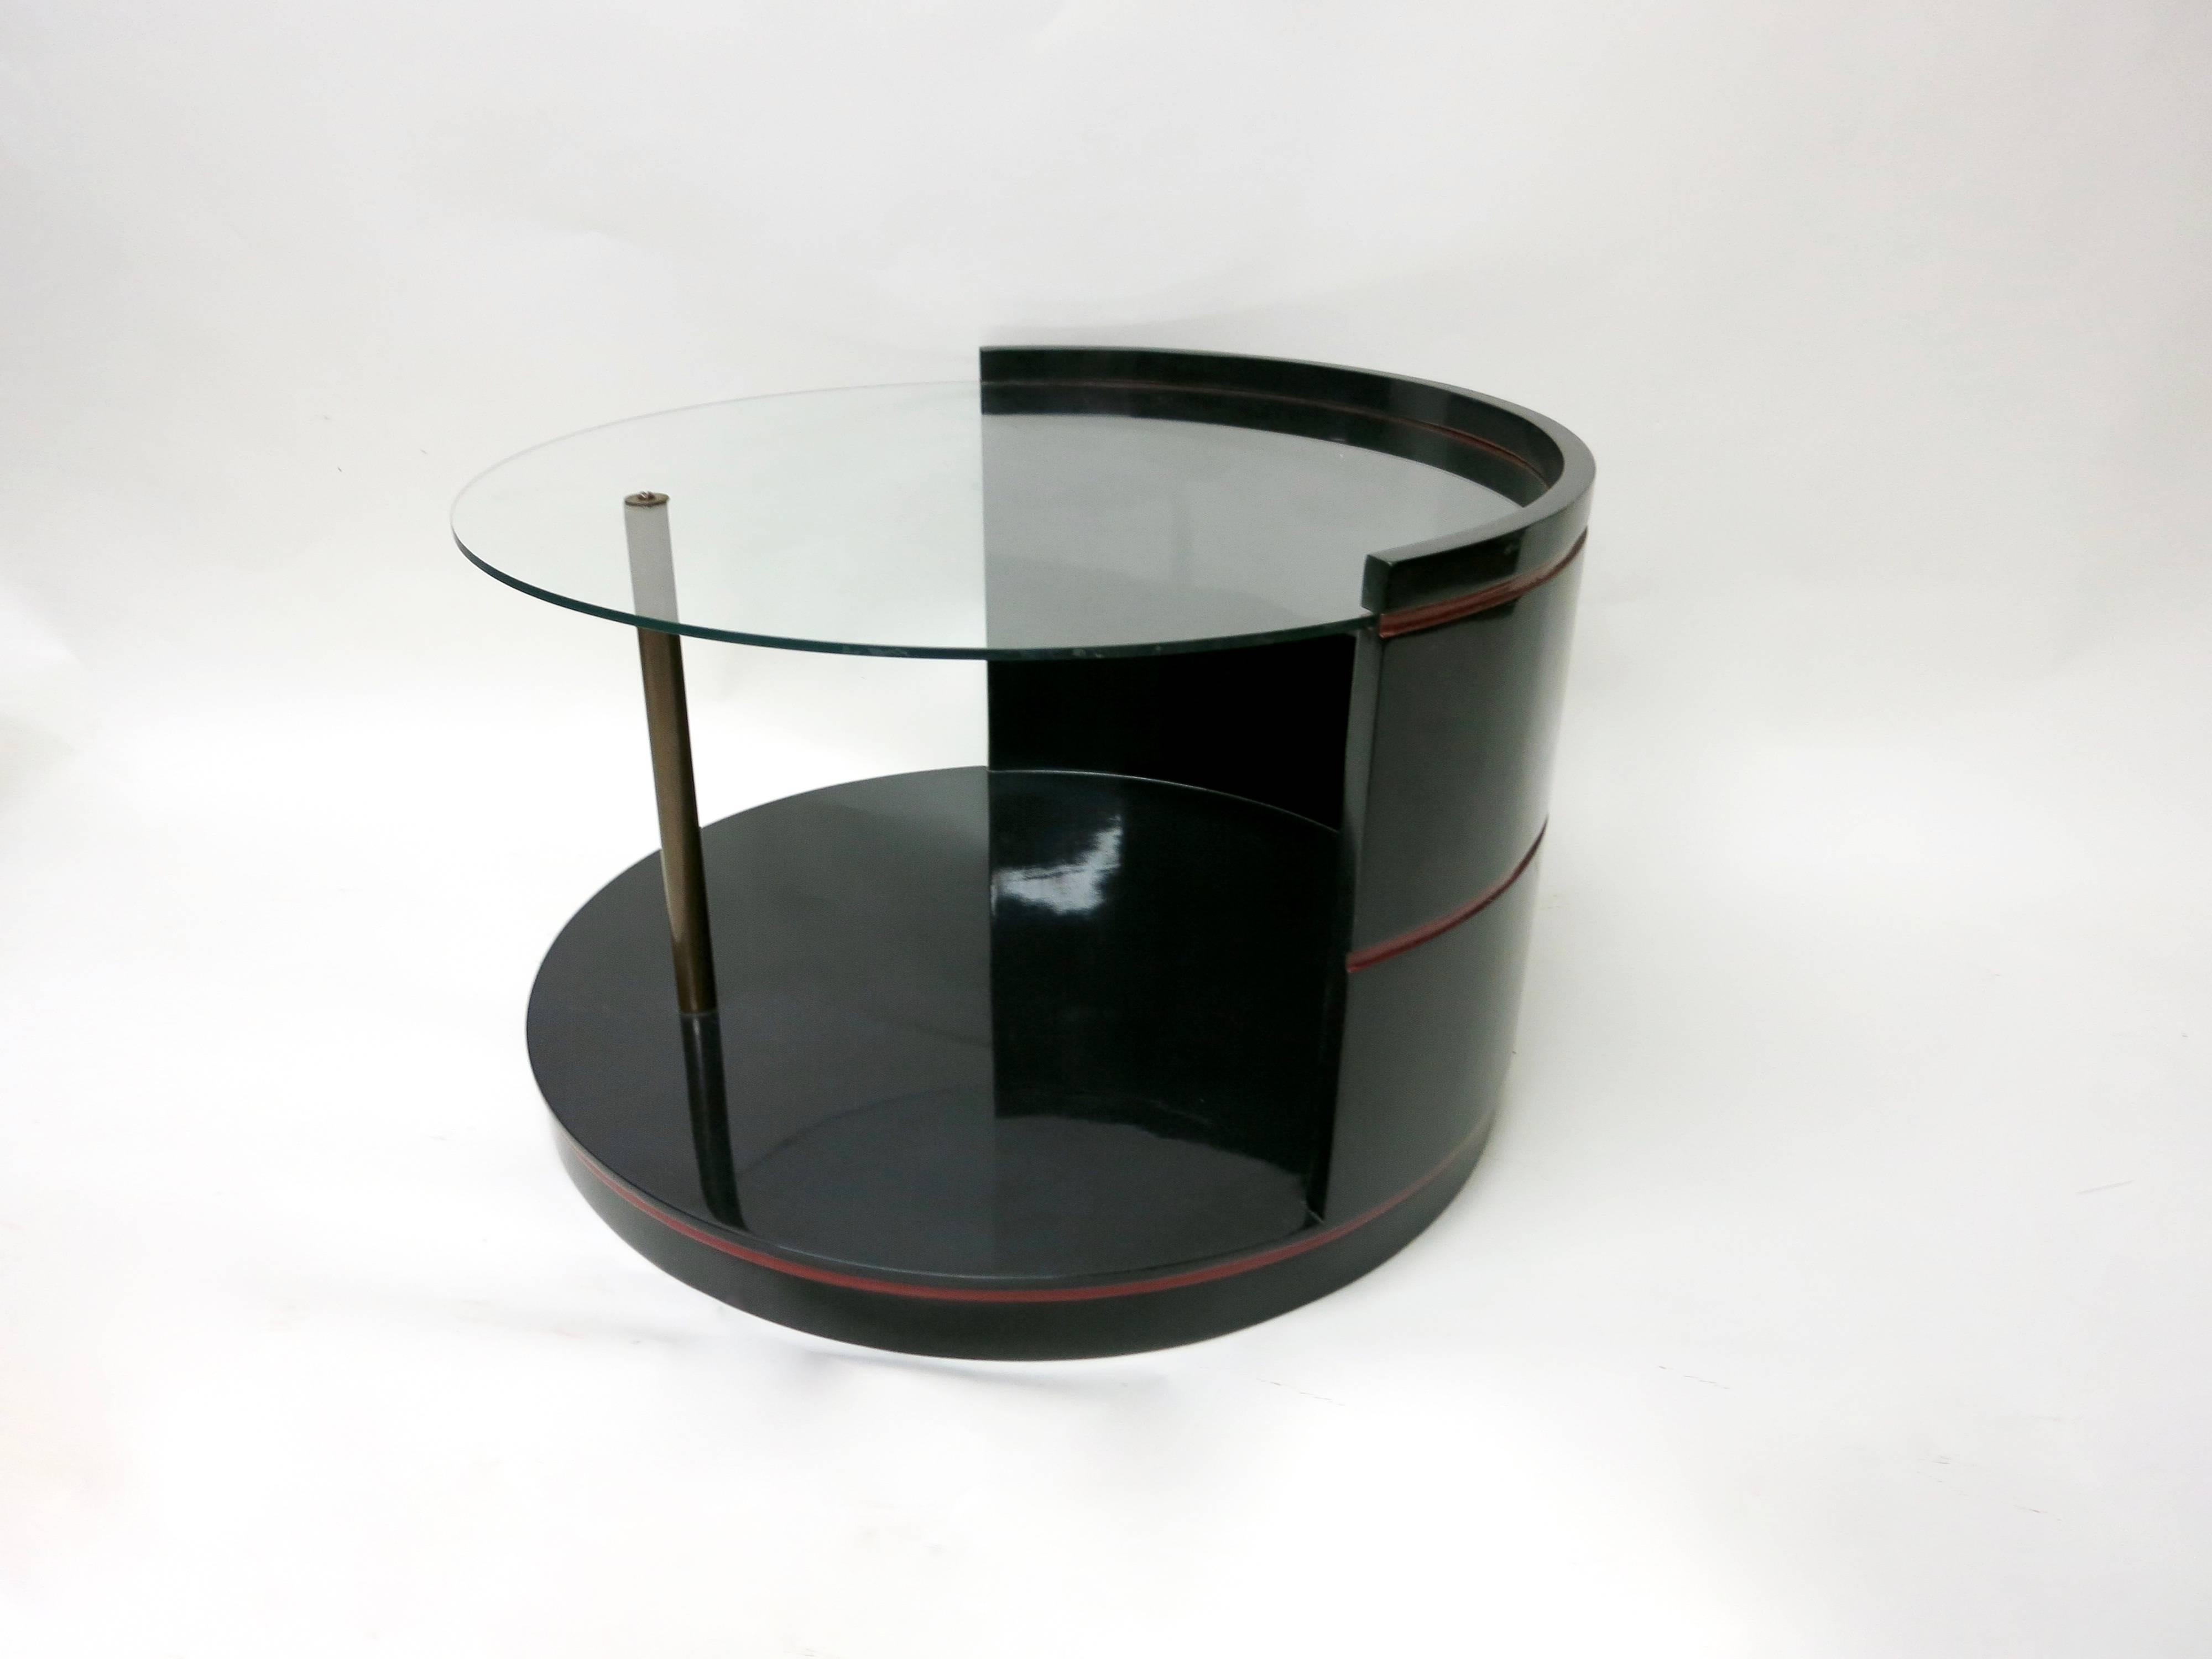 A side table and a cocktail table both finished in black with red detail lacquer.
Side table has three levels with the top glass with patinated brass supports between each level. The round cocktail table has a glass top also supported by a